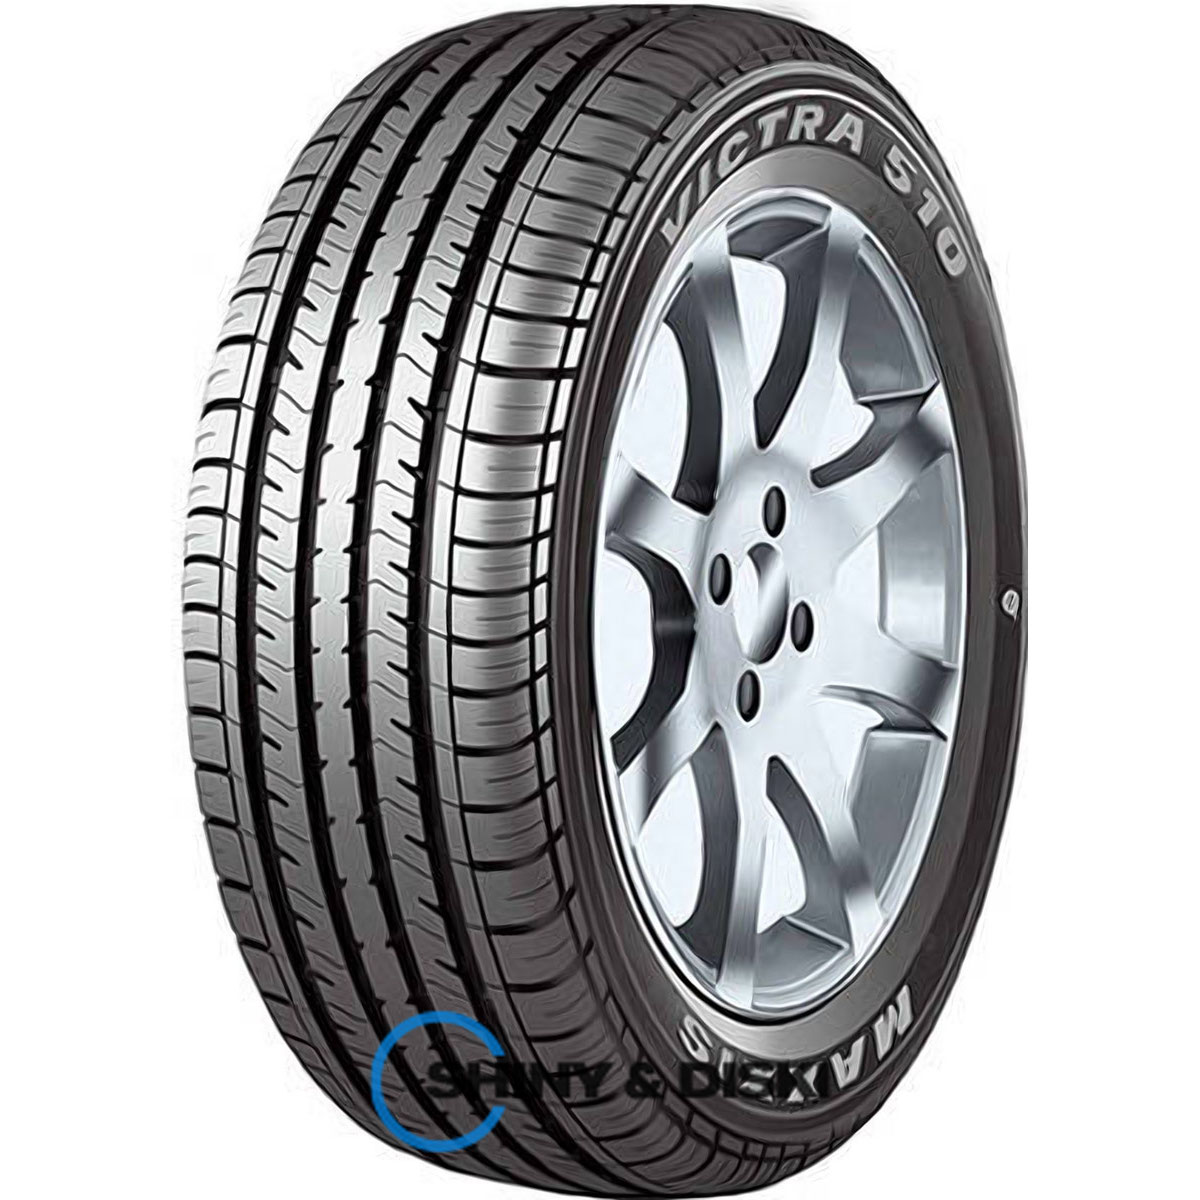 maxxis ma510r victra 215/60 r16 95v